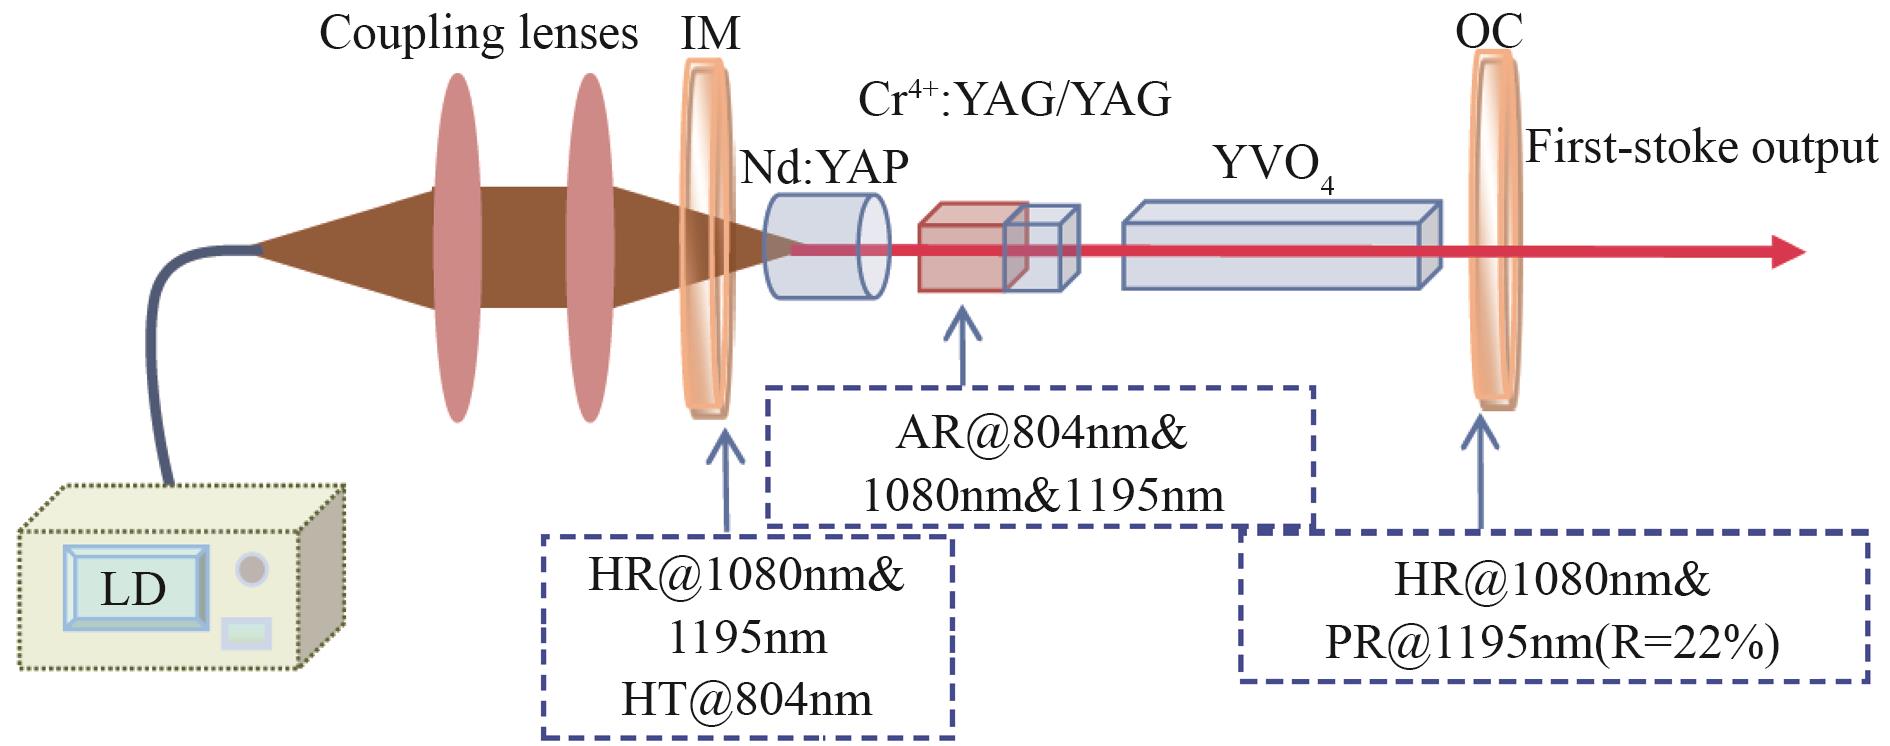 Experimental setup of the LD end-pumped passively Q-switched Nd:YAP/YVO4 Raman laser